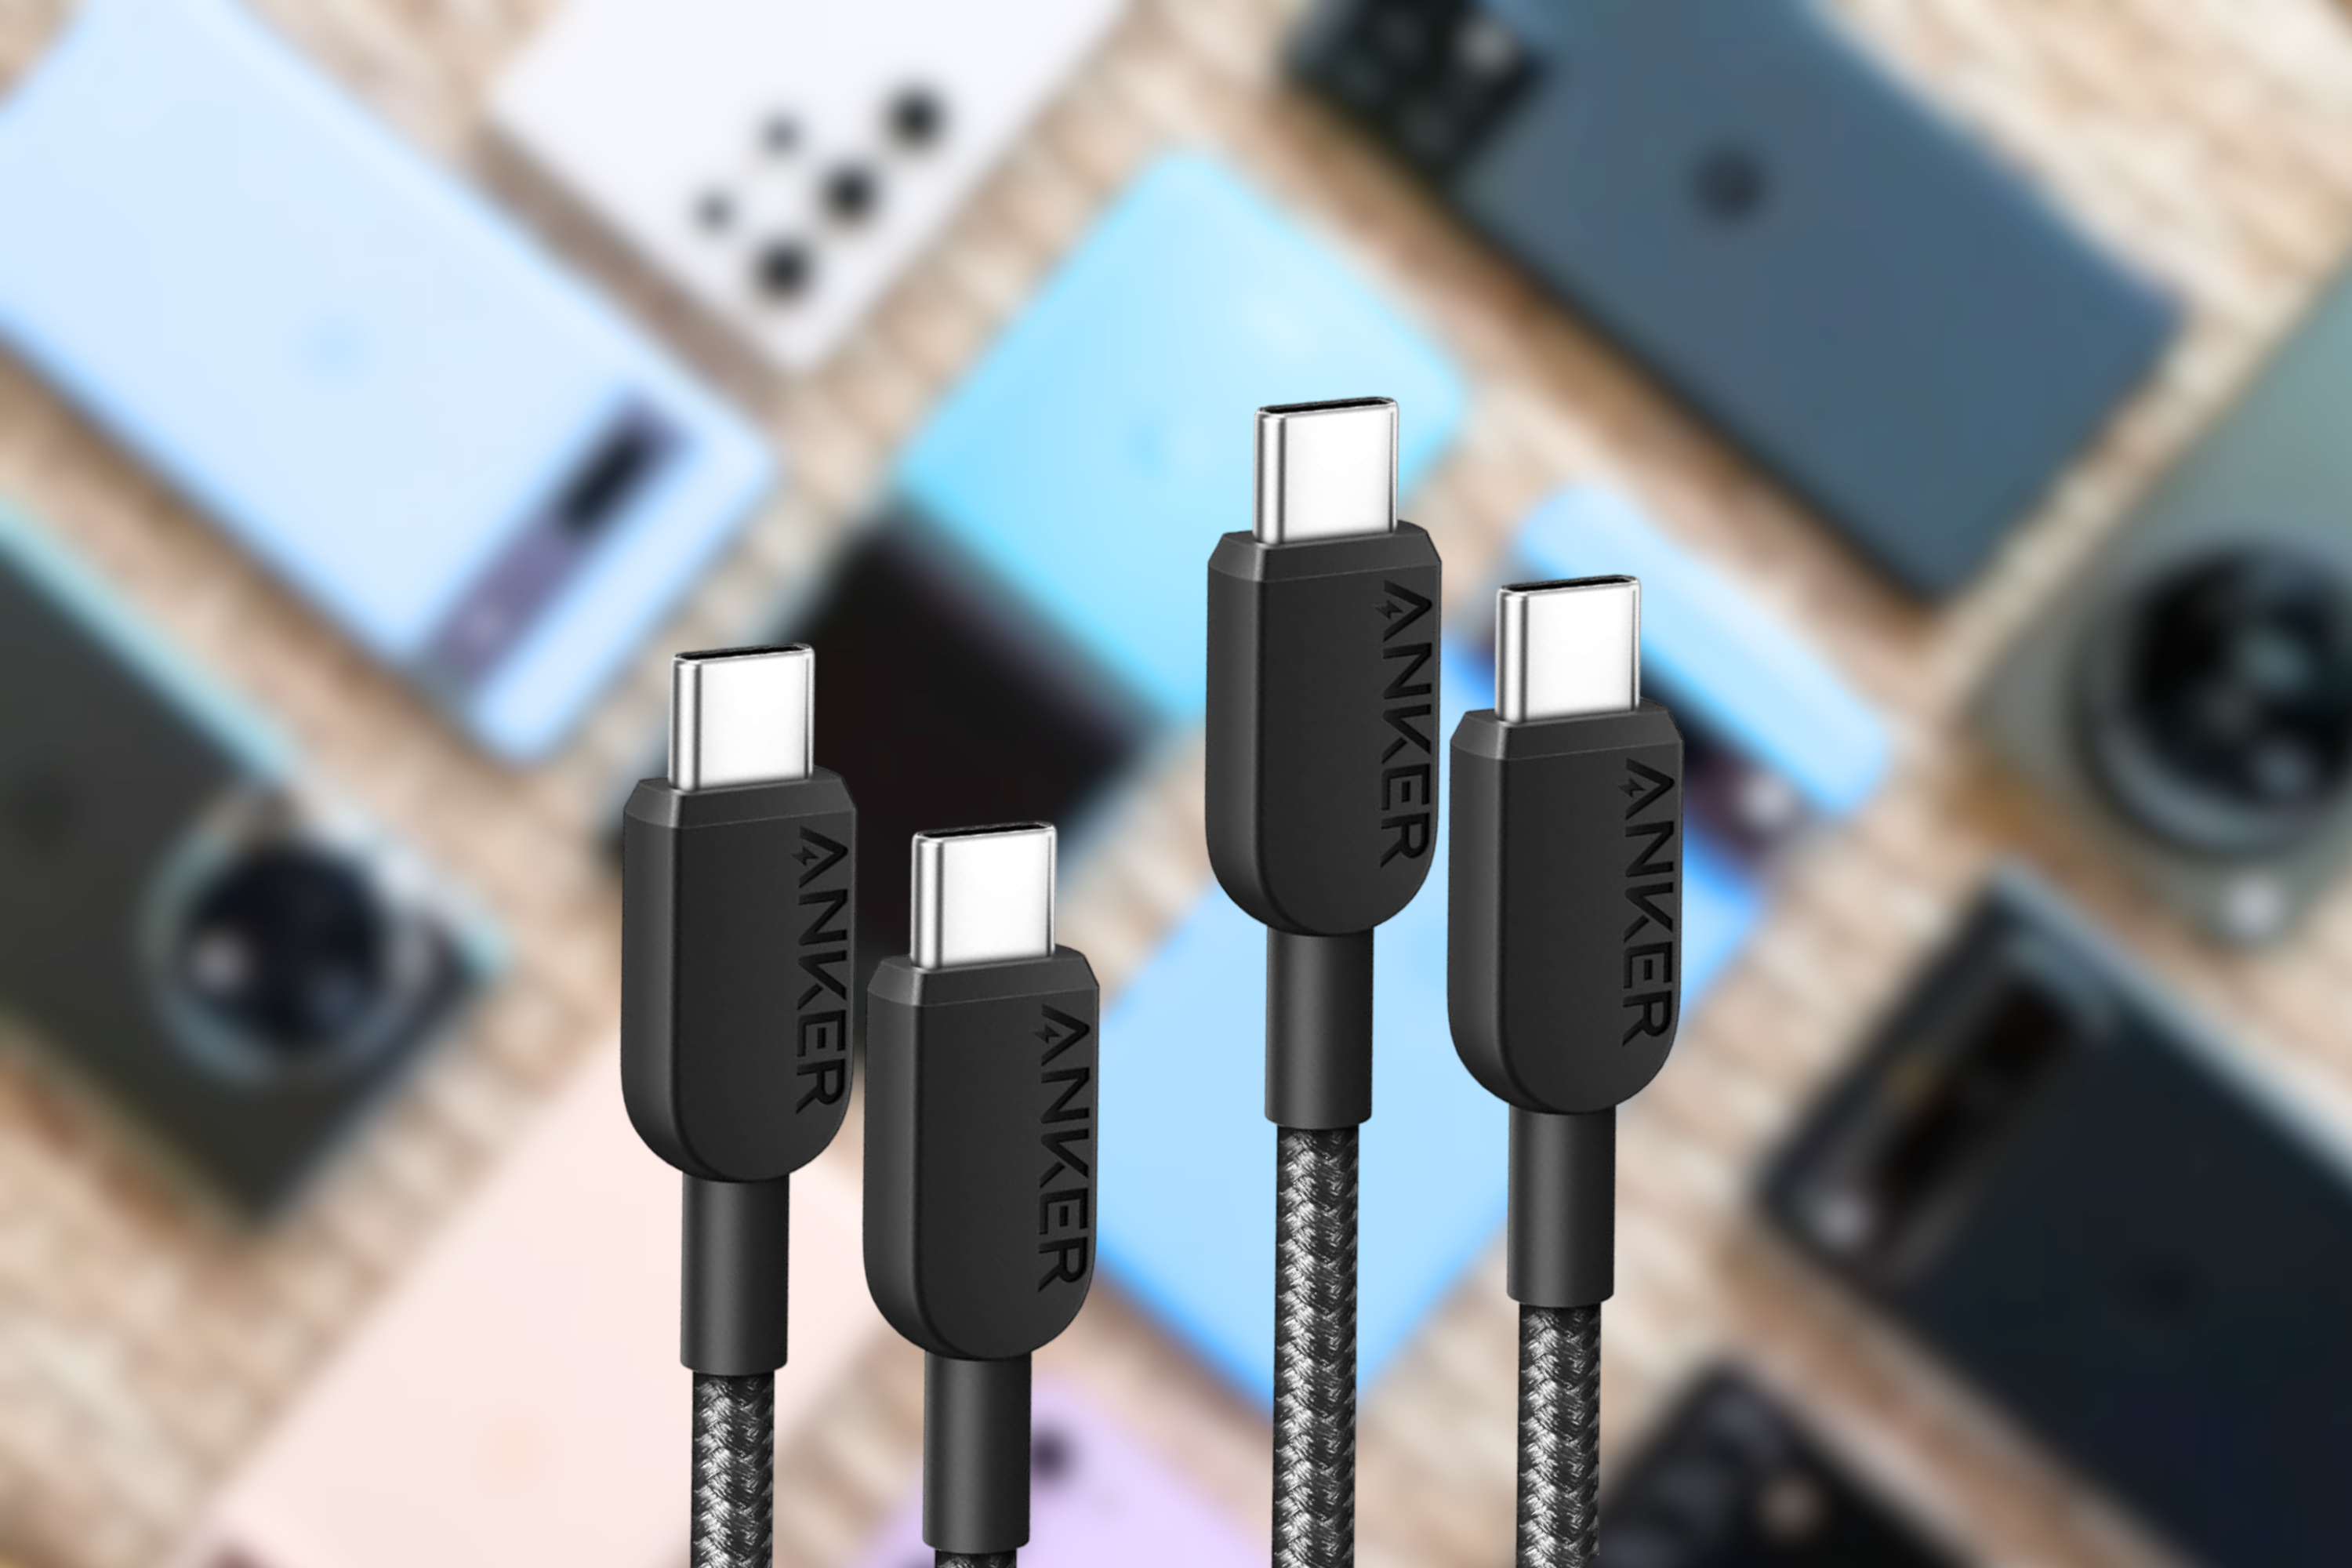 Anker 310 USB C to USB C Cable (3ft, 2 Pack)